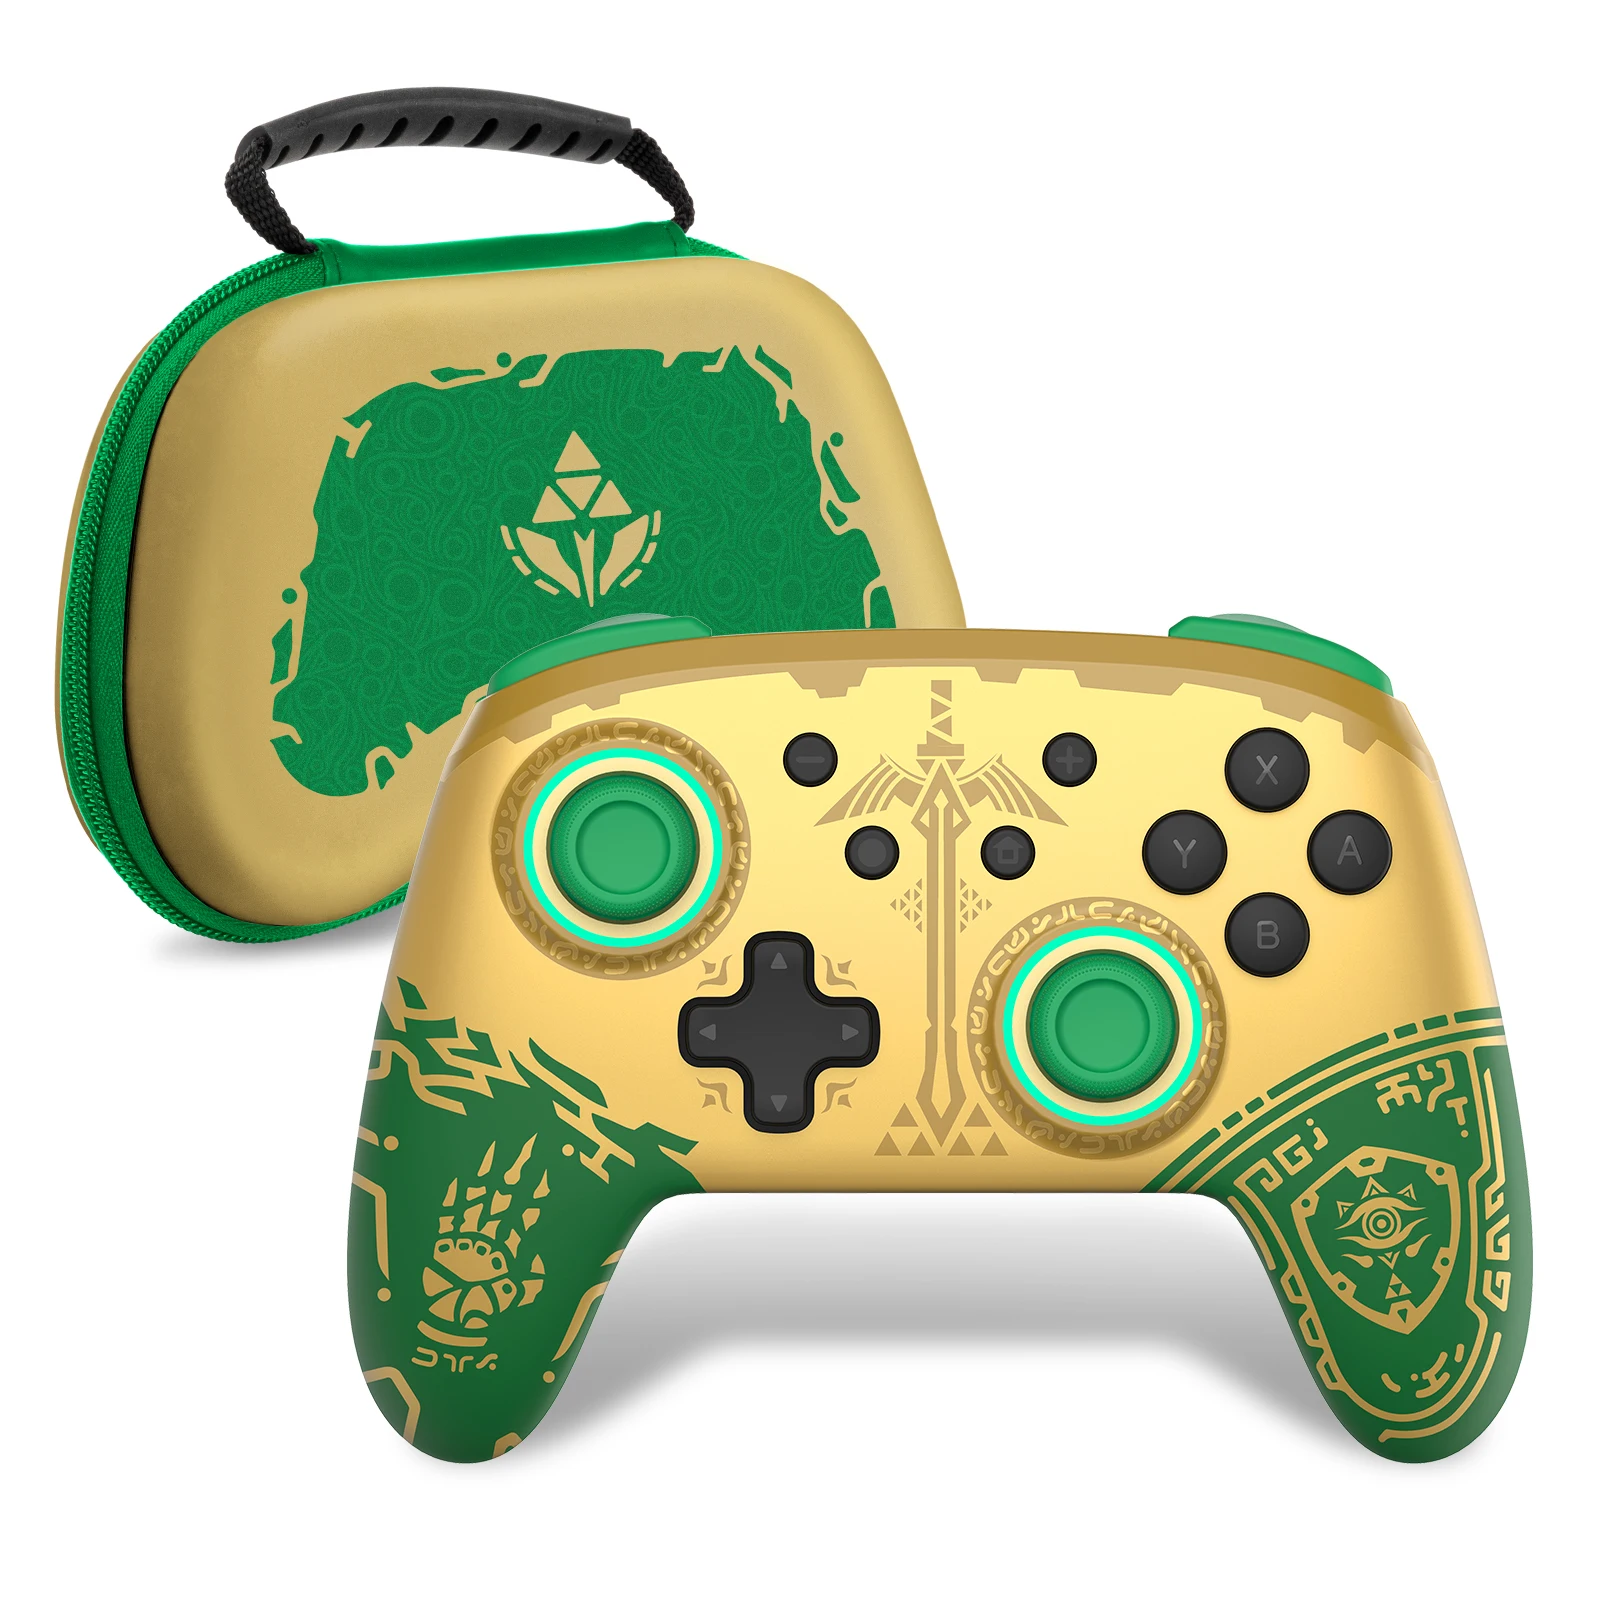 

NEW IINE Golden Joypad Wireless Controller Wake Up Auto Fire Function Compatible For Swtich/Lite/OLED